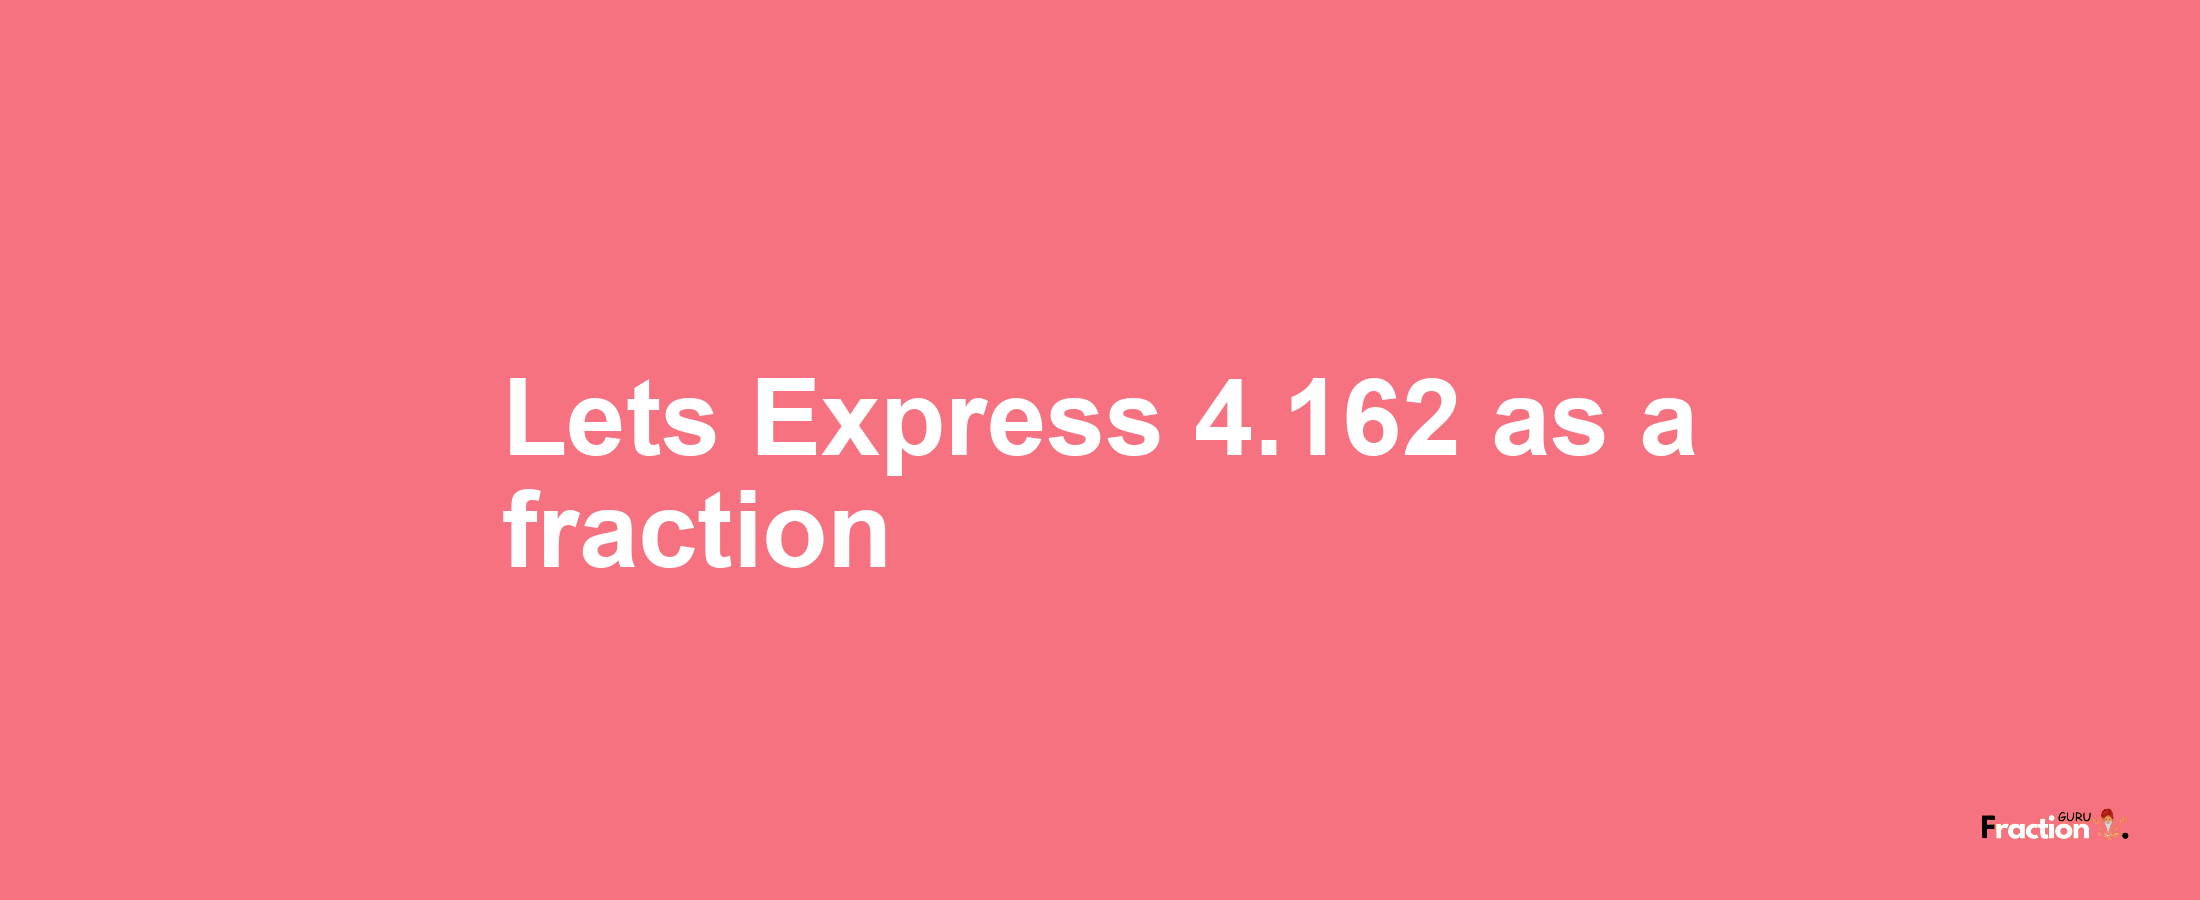 Lets Express 4.162 as afraction